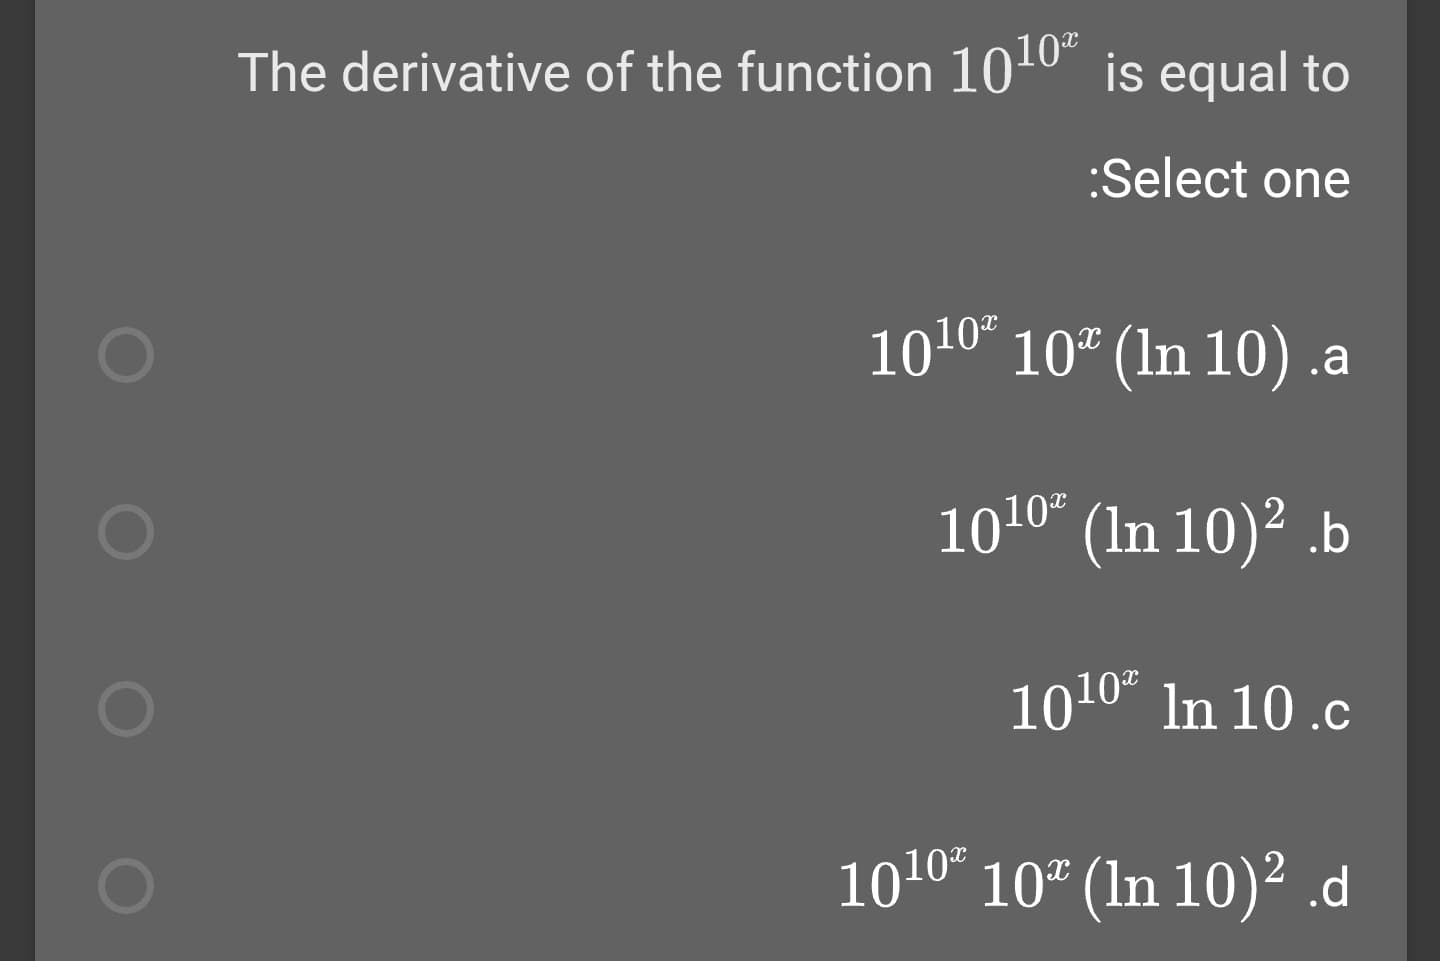 The derivative of the function 1010 is equal to
